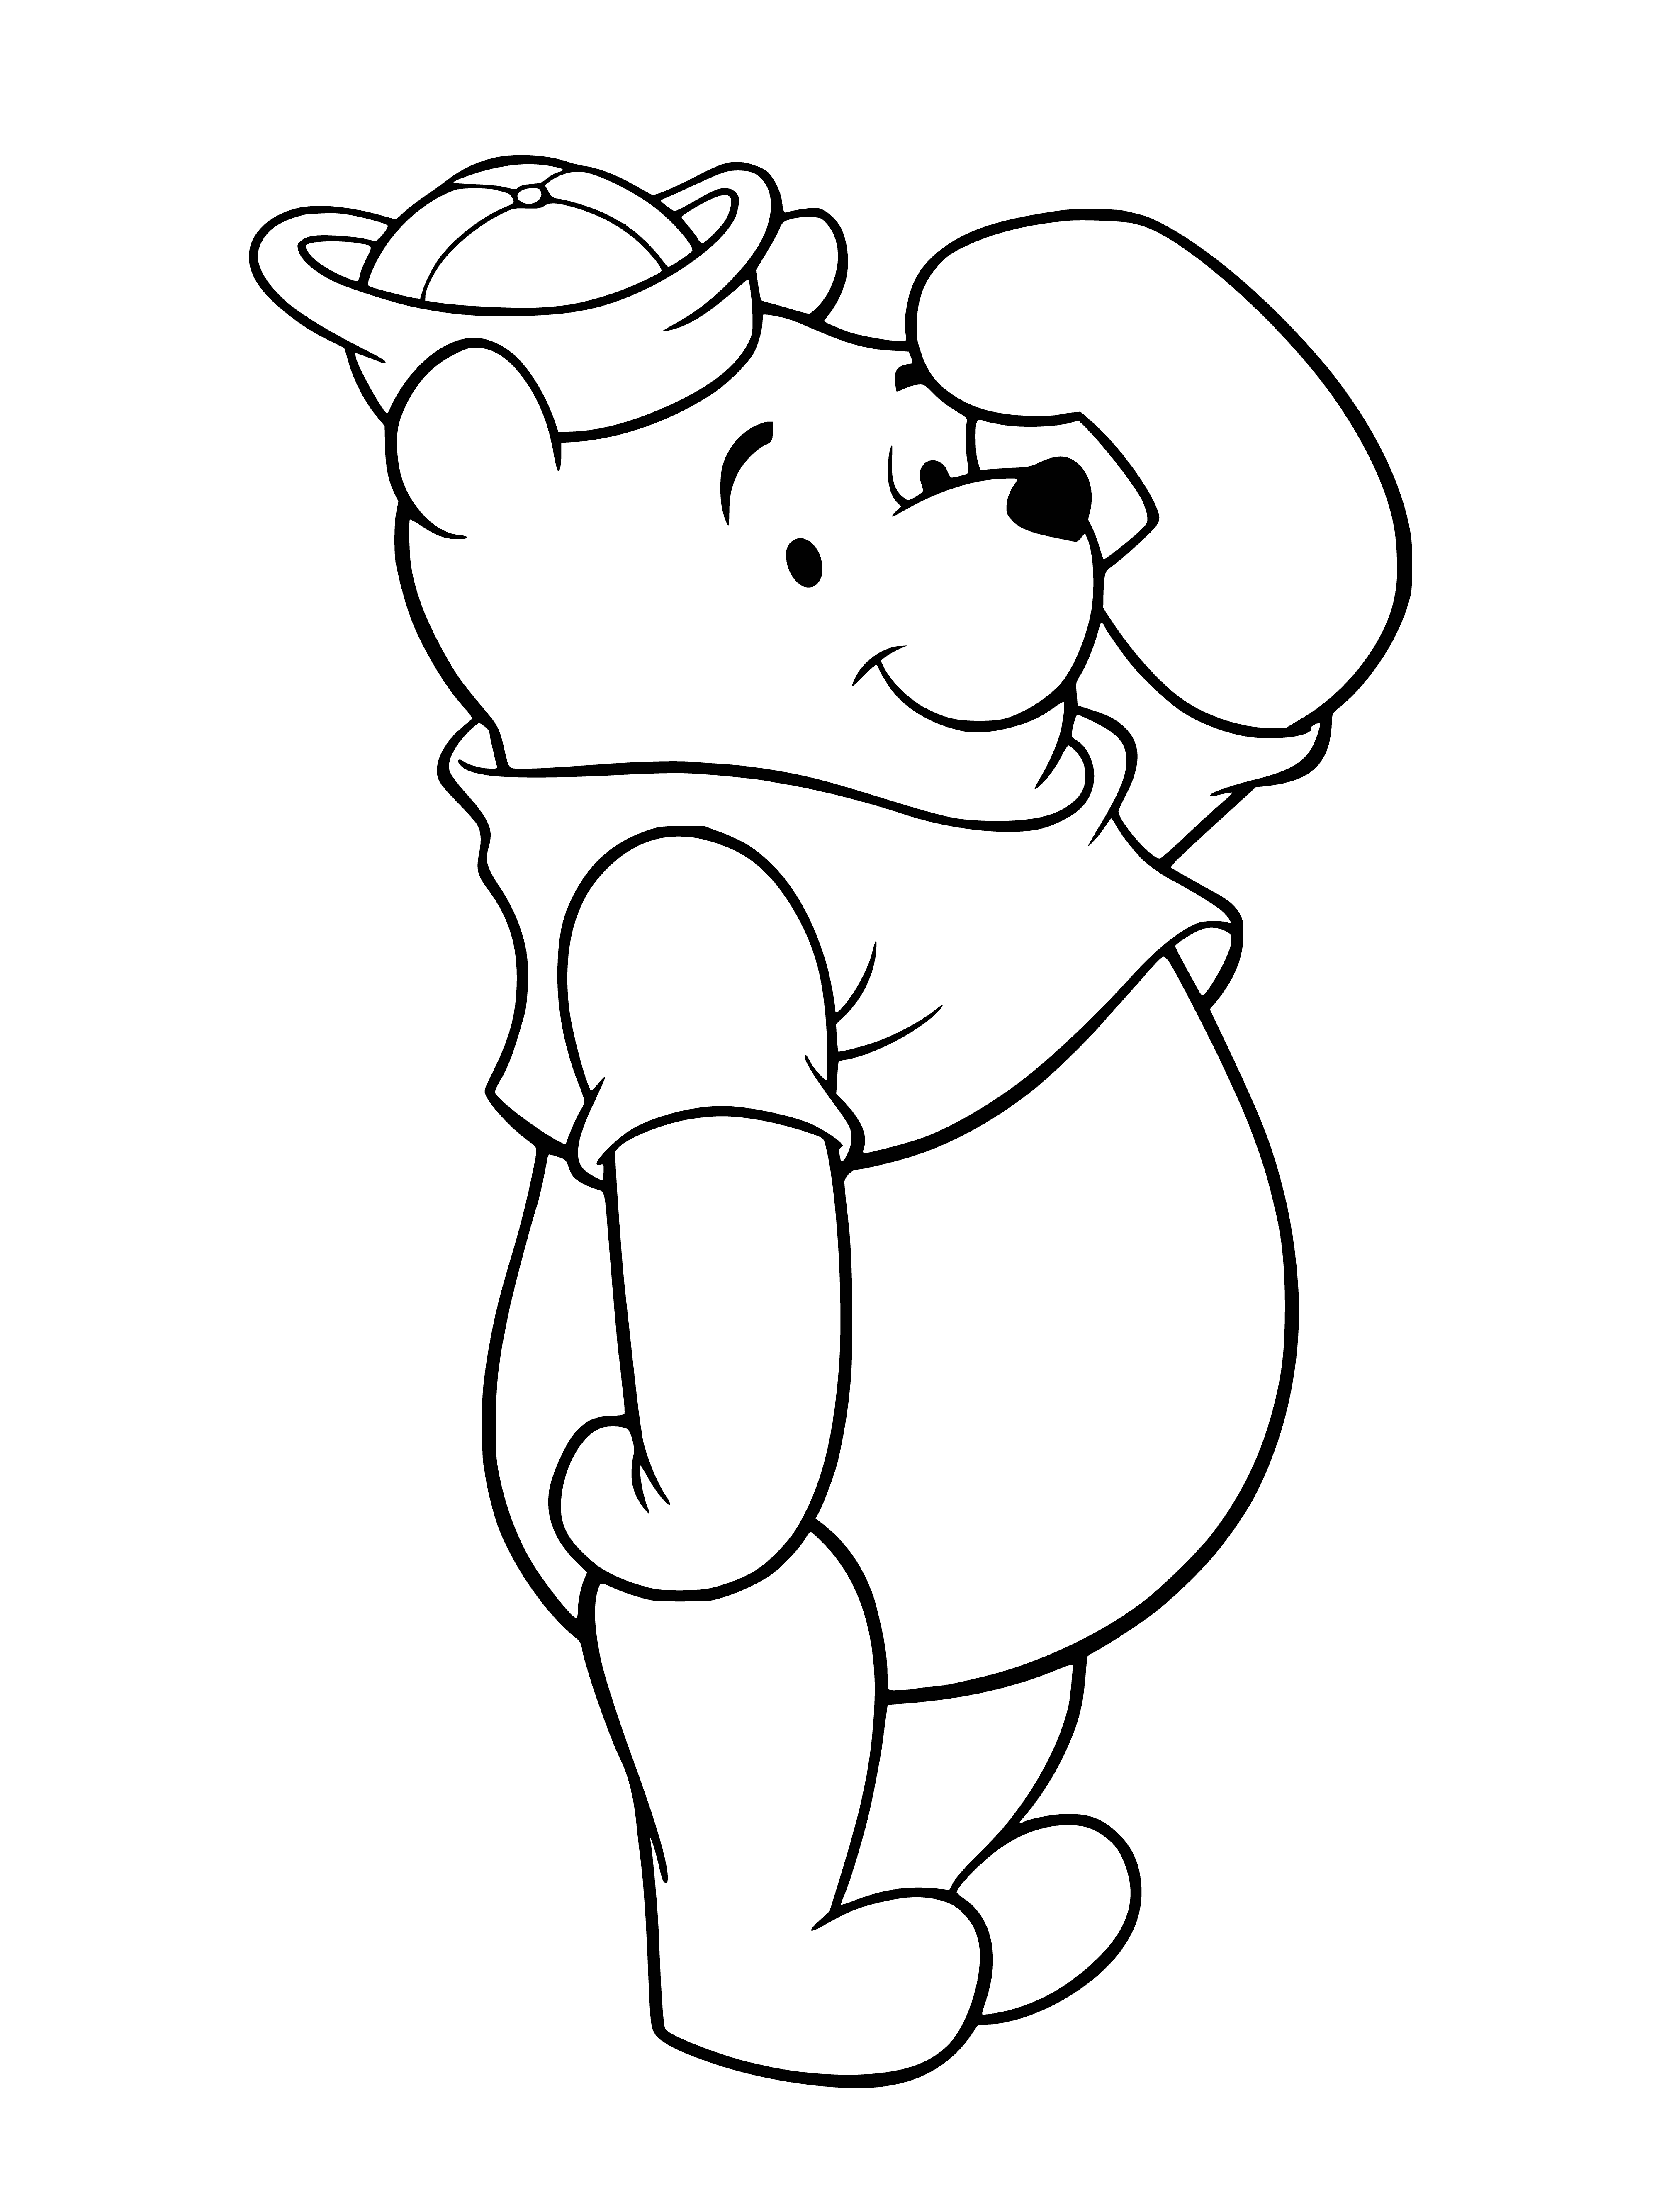 Winnie the sailor coloring page